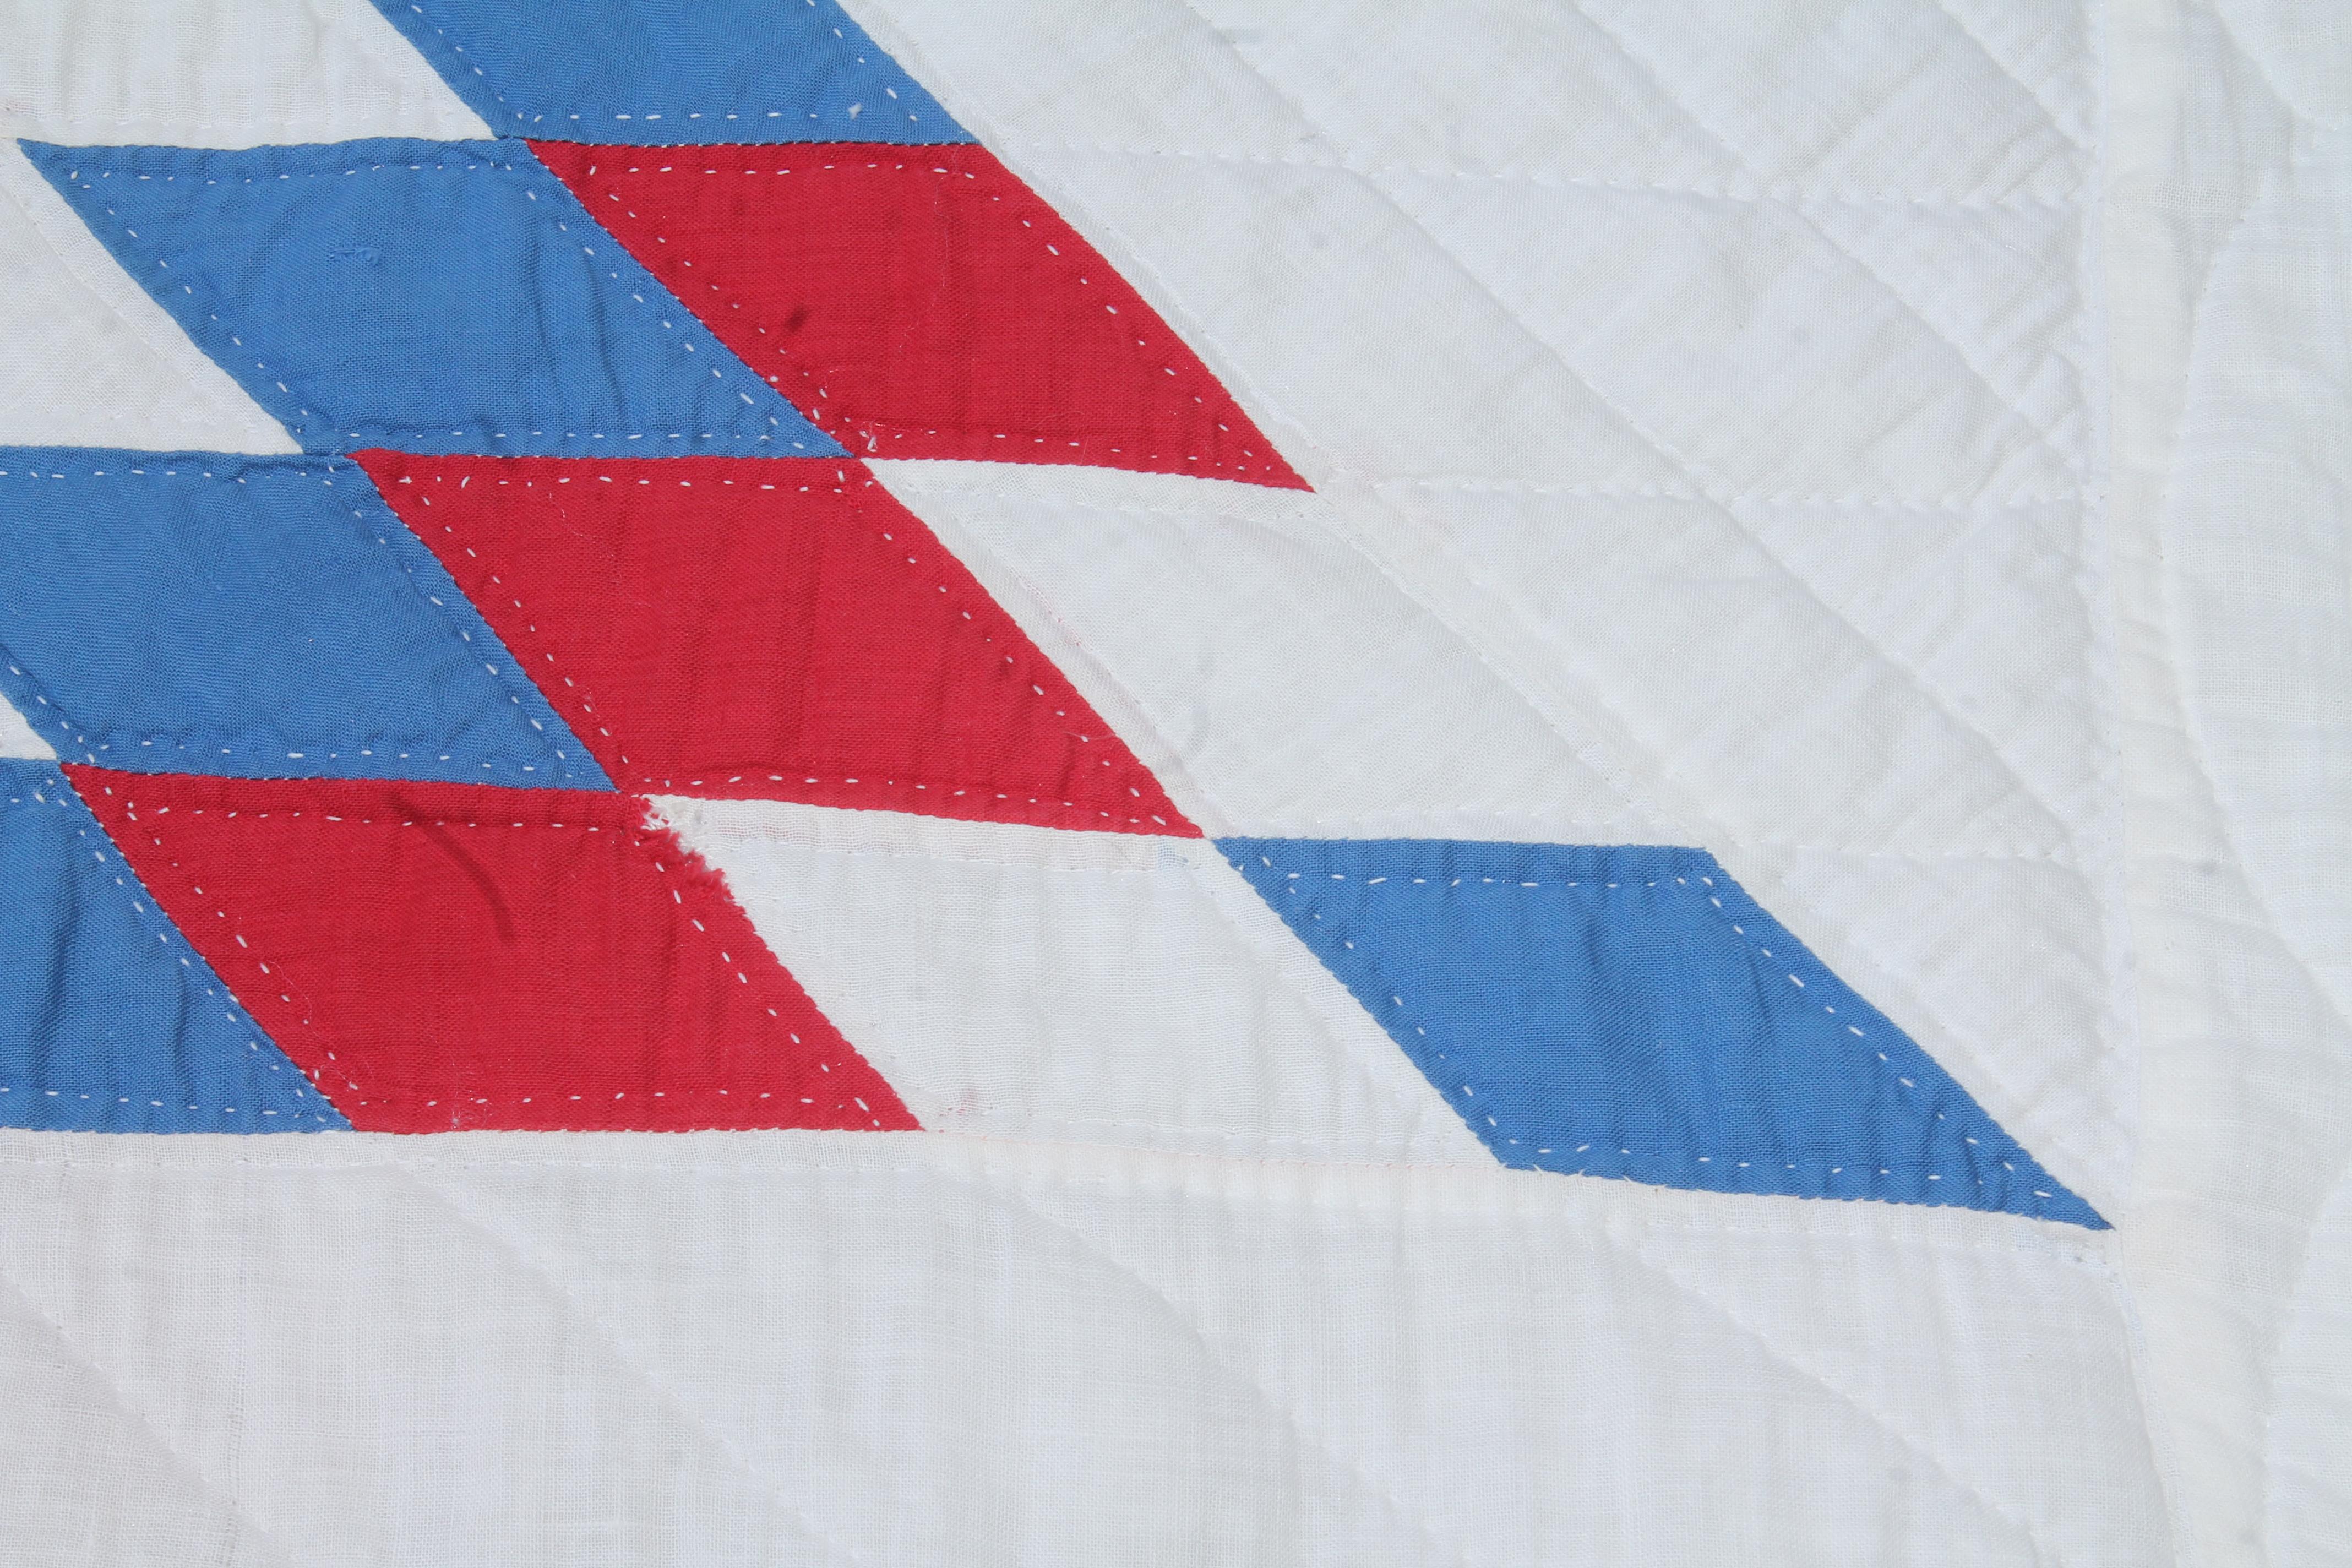 Adirondack Fantastic Early 20thc Patriotic Star Quilt For Sale